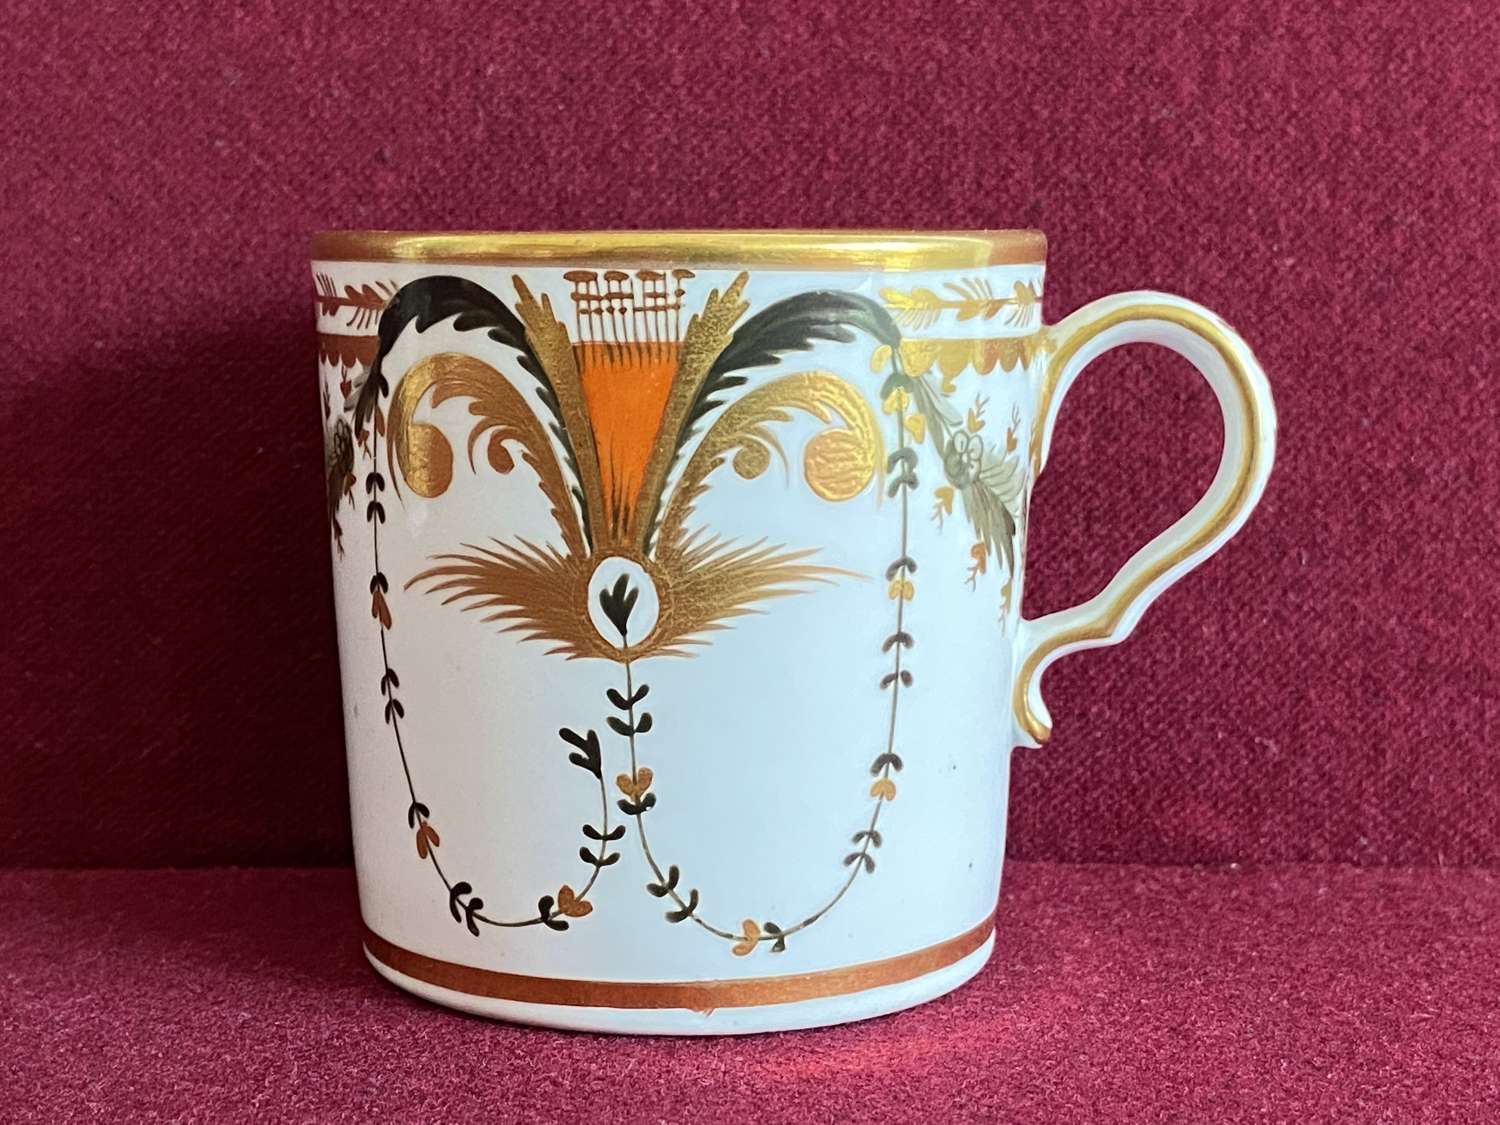 Spode Porcelain Coffee Can c.1800-1815